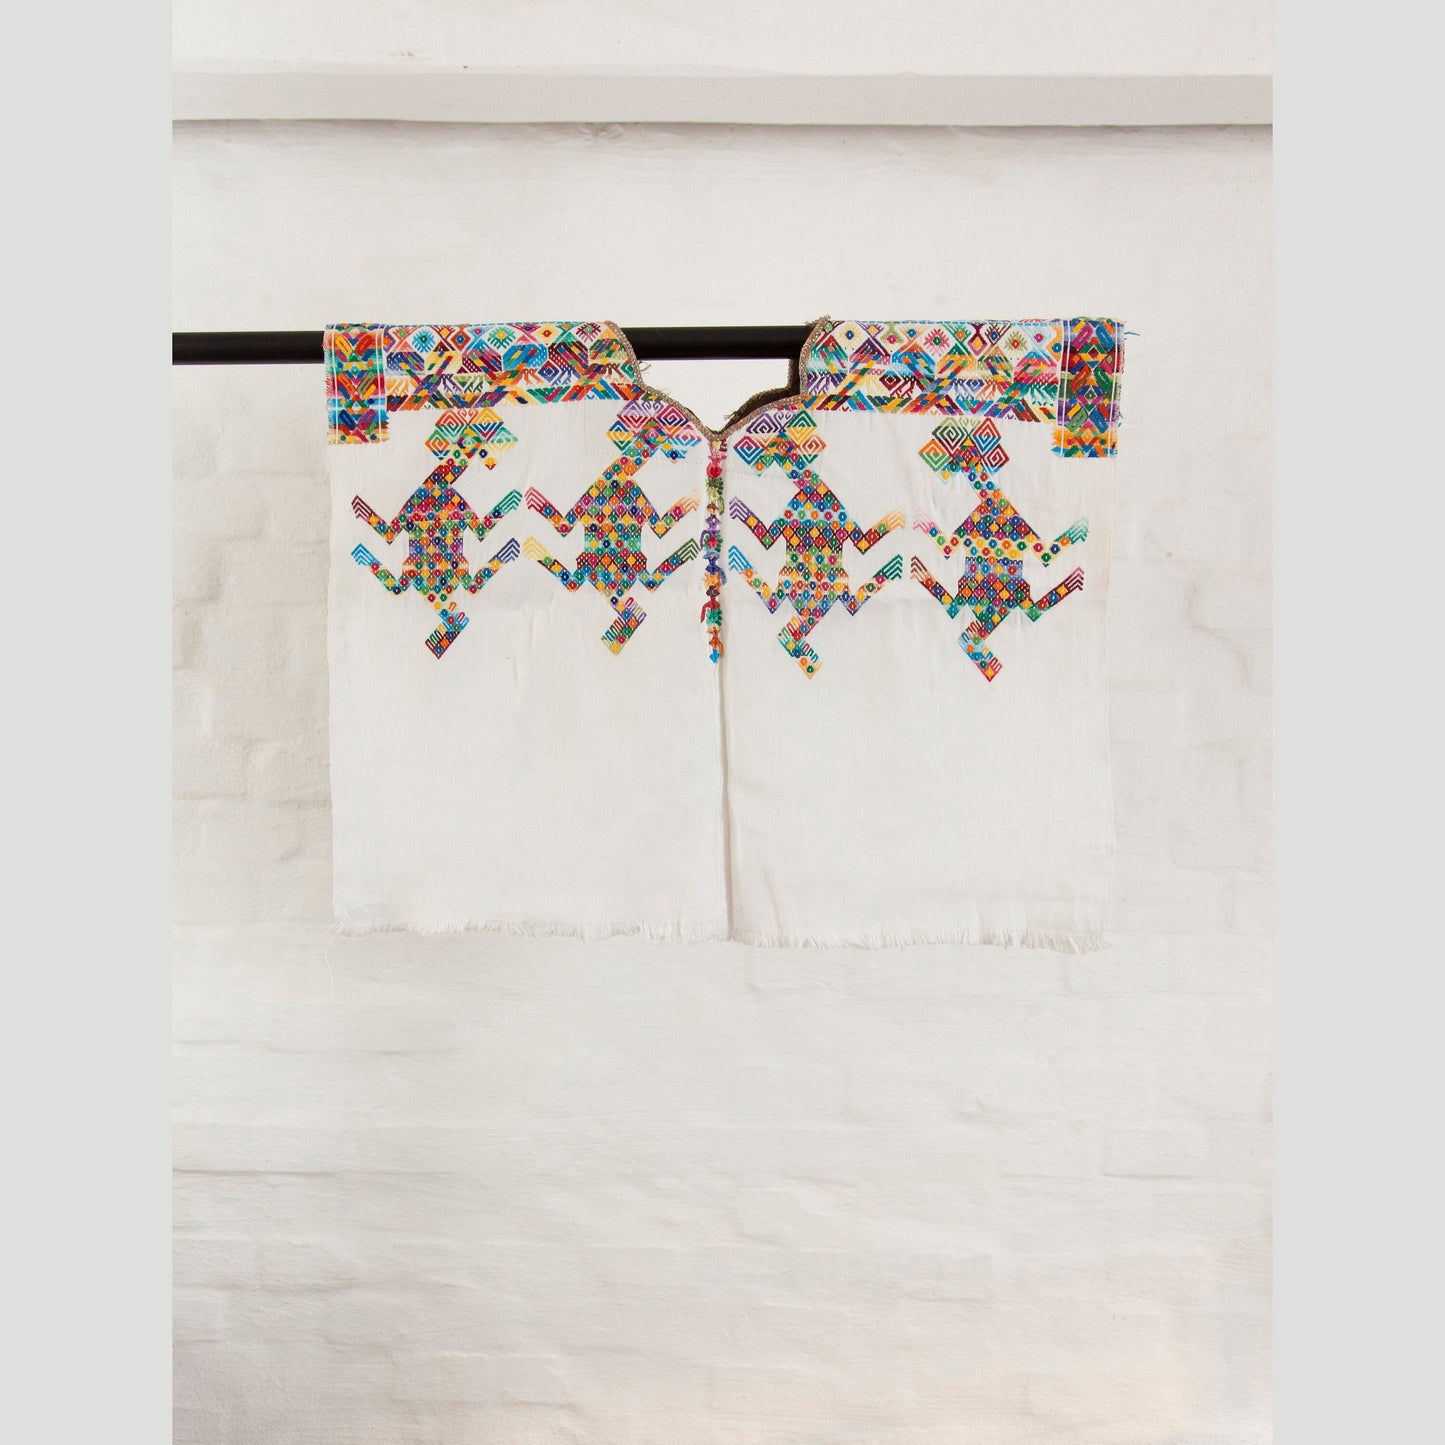 Rare fabric, white/colorful, 100x120cm unique from Guatemala, handwoven by the Mayan women, sewing projects such as pillows, vests, bags, accessories